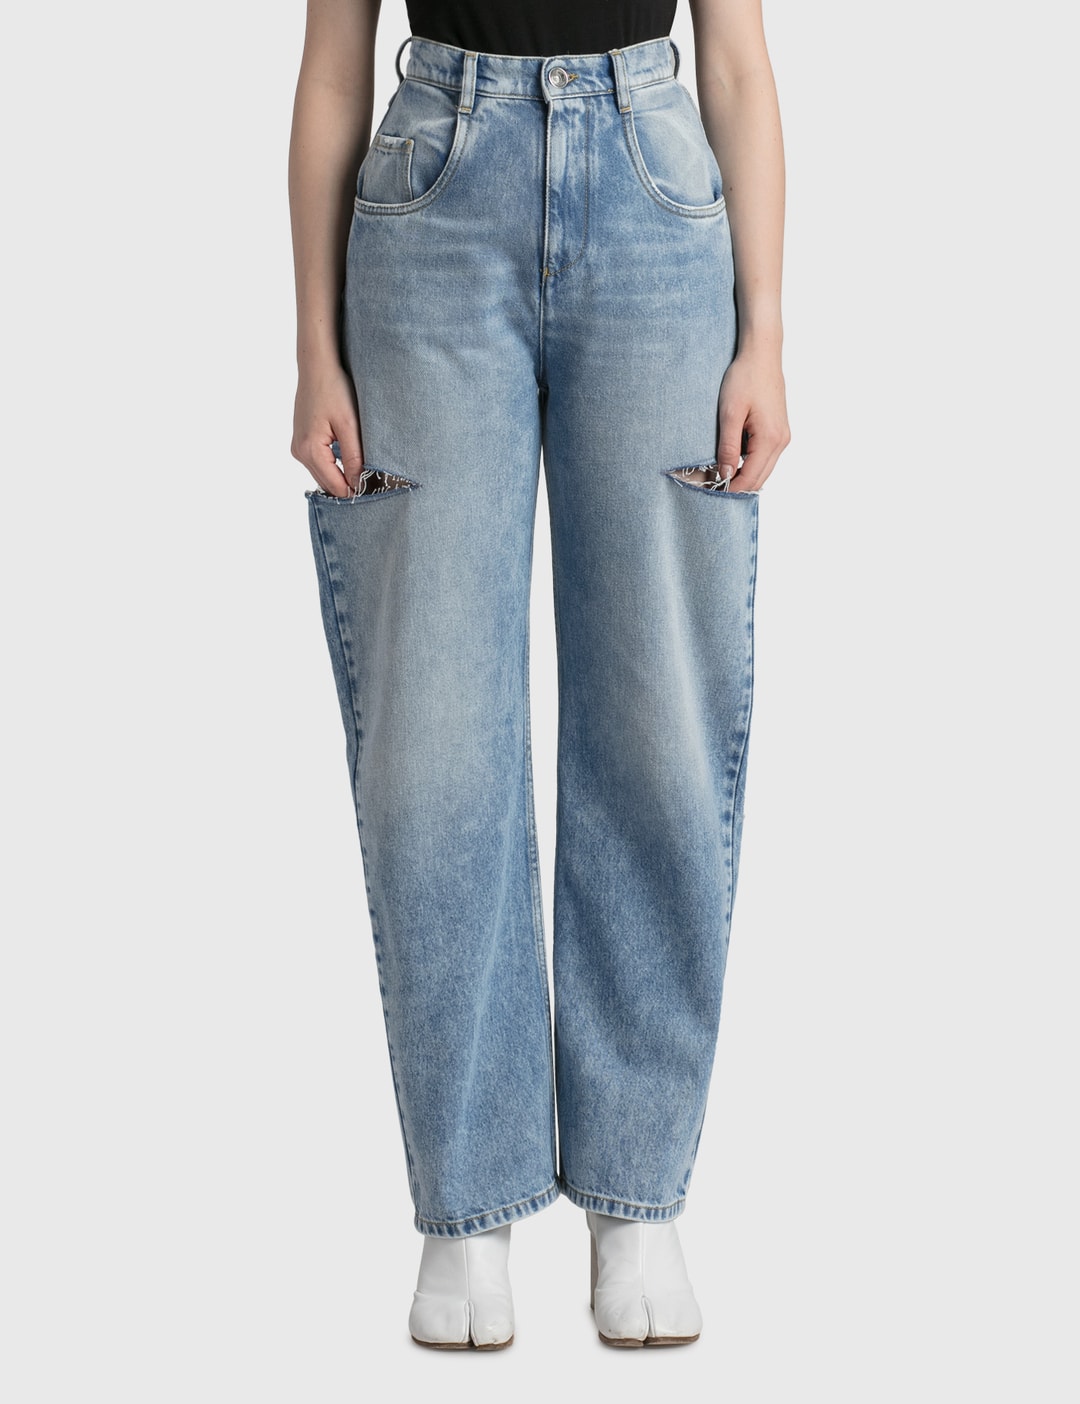 Maison Margiela - Cut-Out High Rise Jeans | HBX - Globally Curated ...